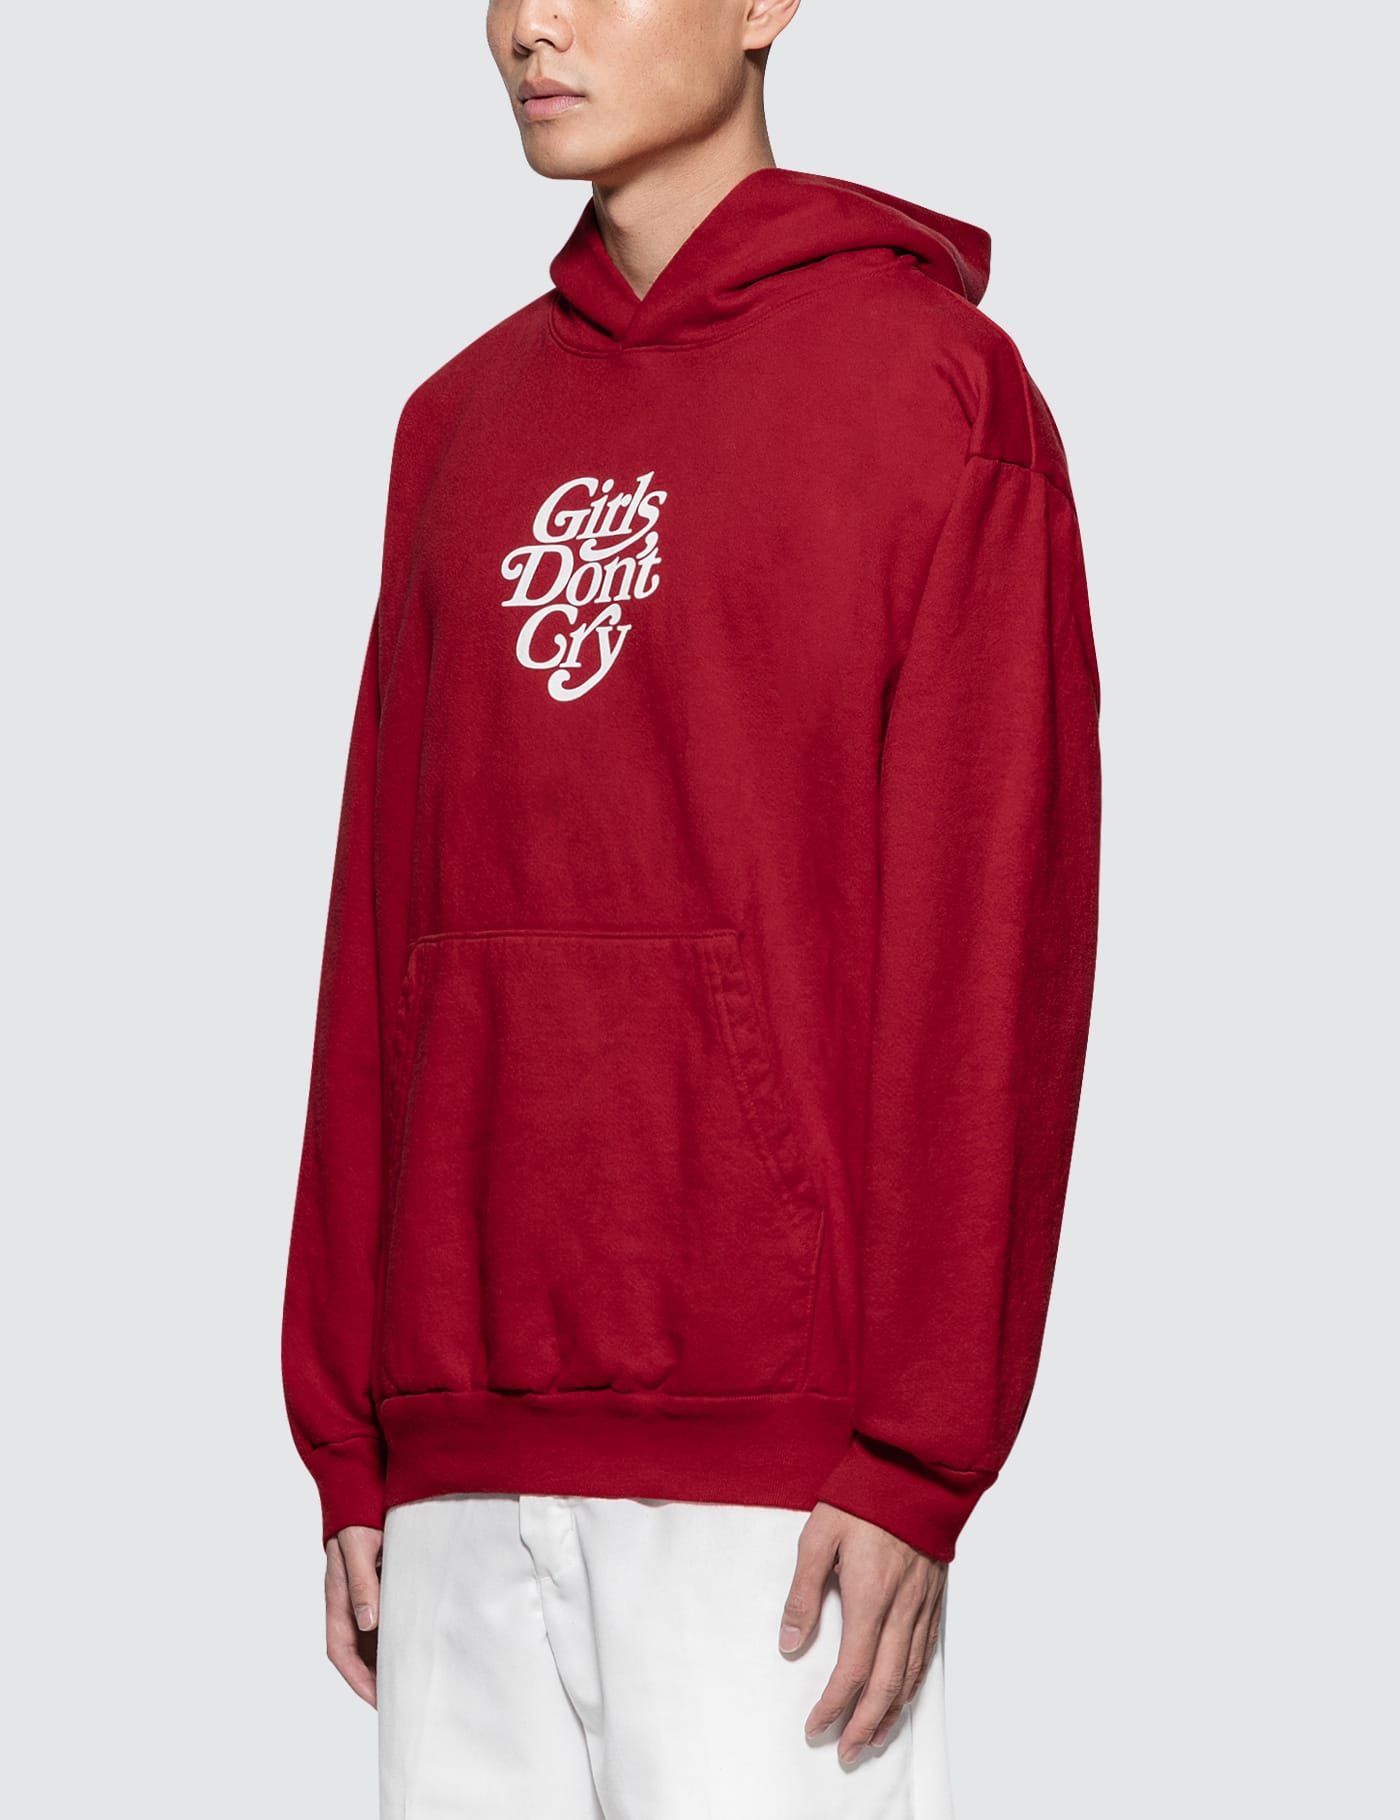 Girls Don't Cry - GDC Cafe Hoodie | HBX - ハイプビースト(Hypebeast 